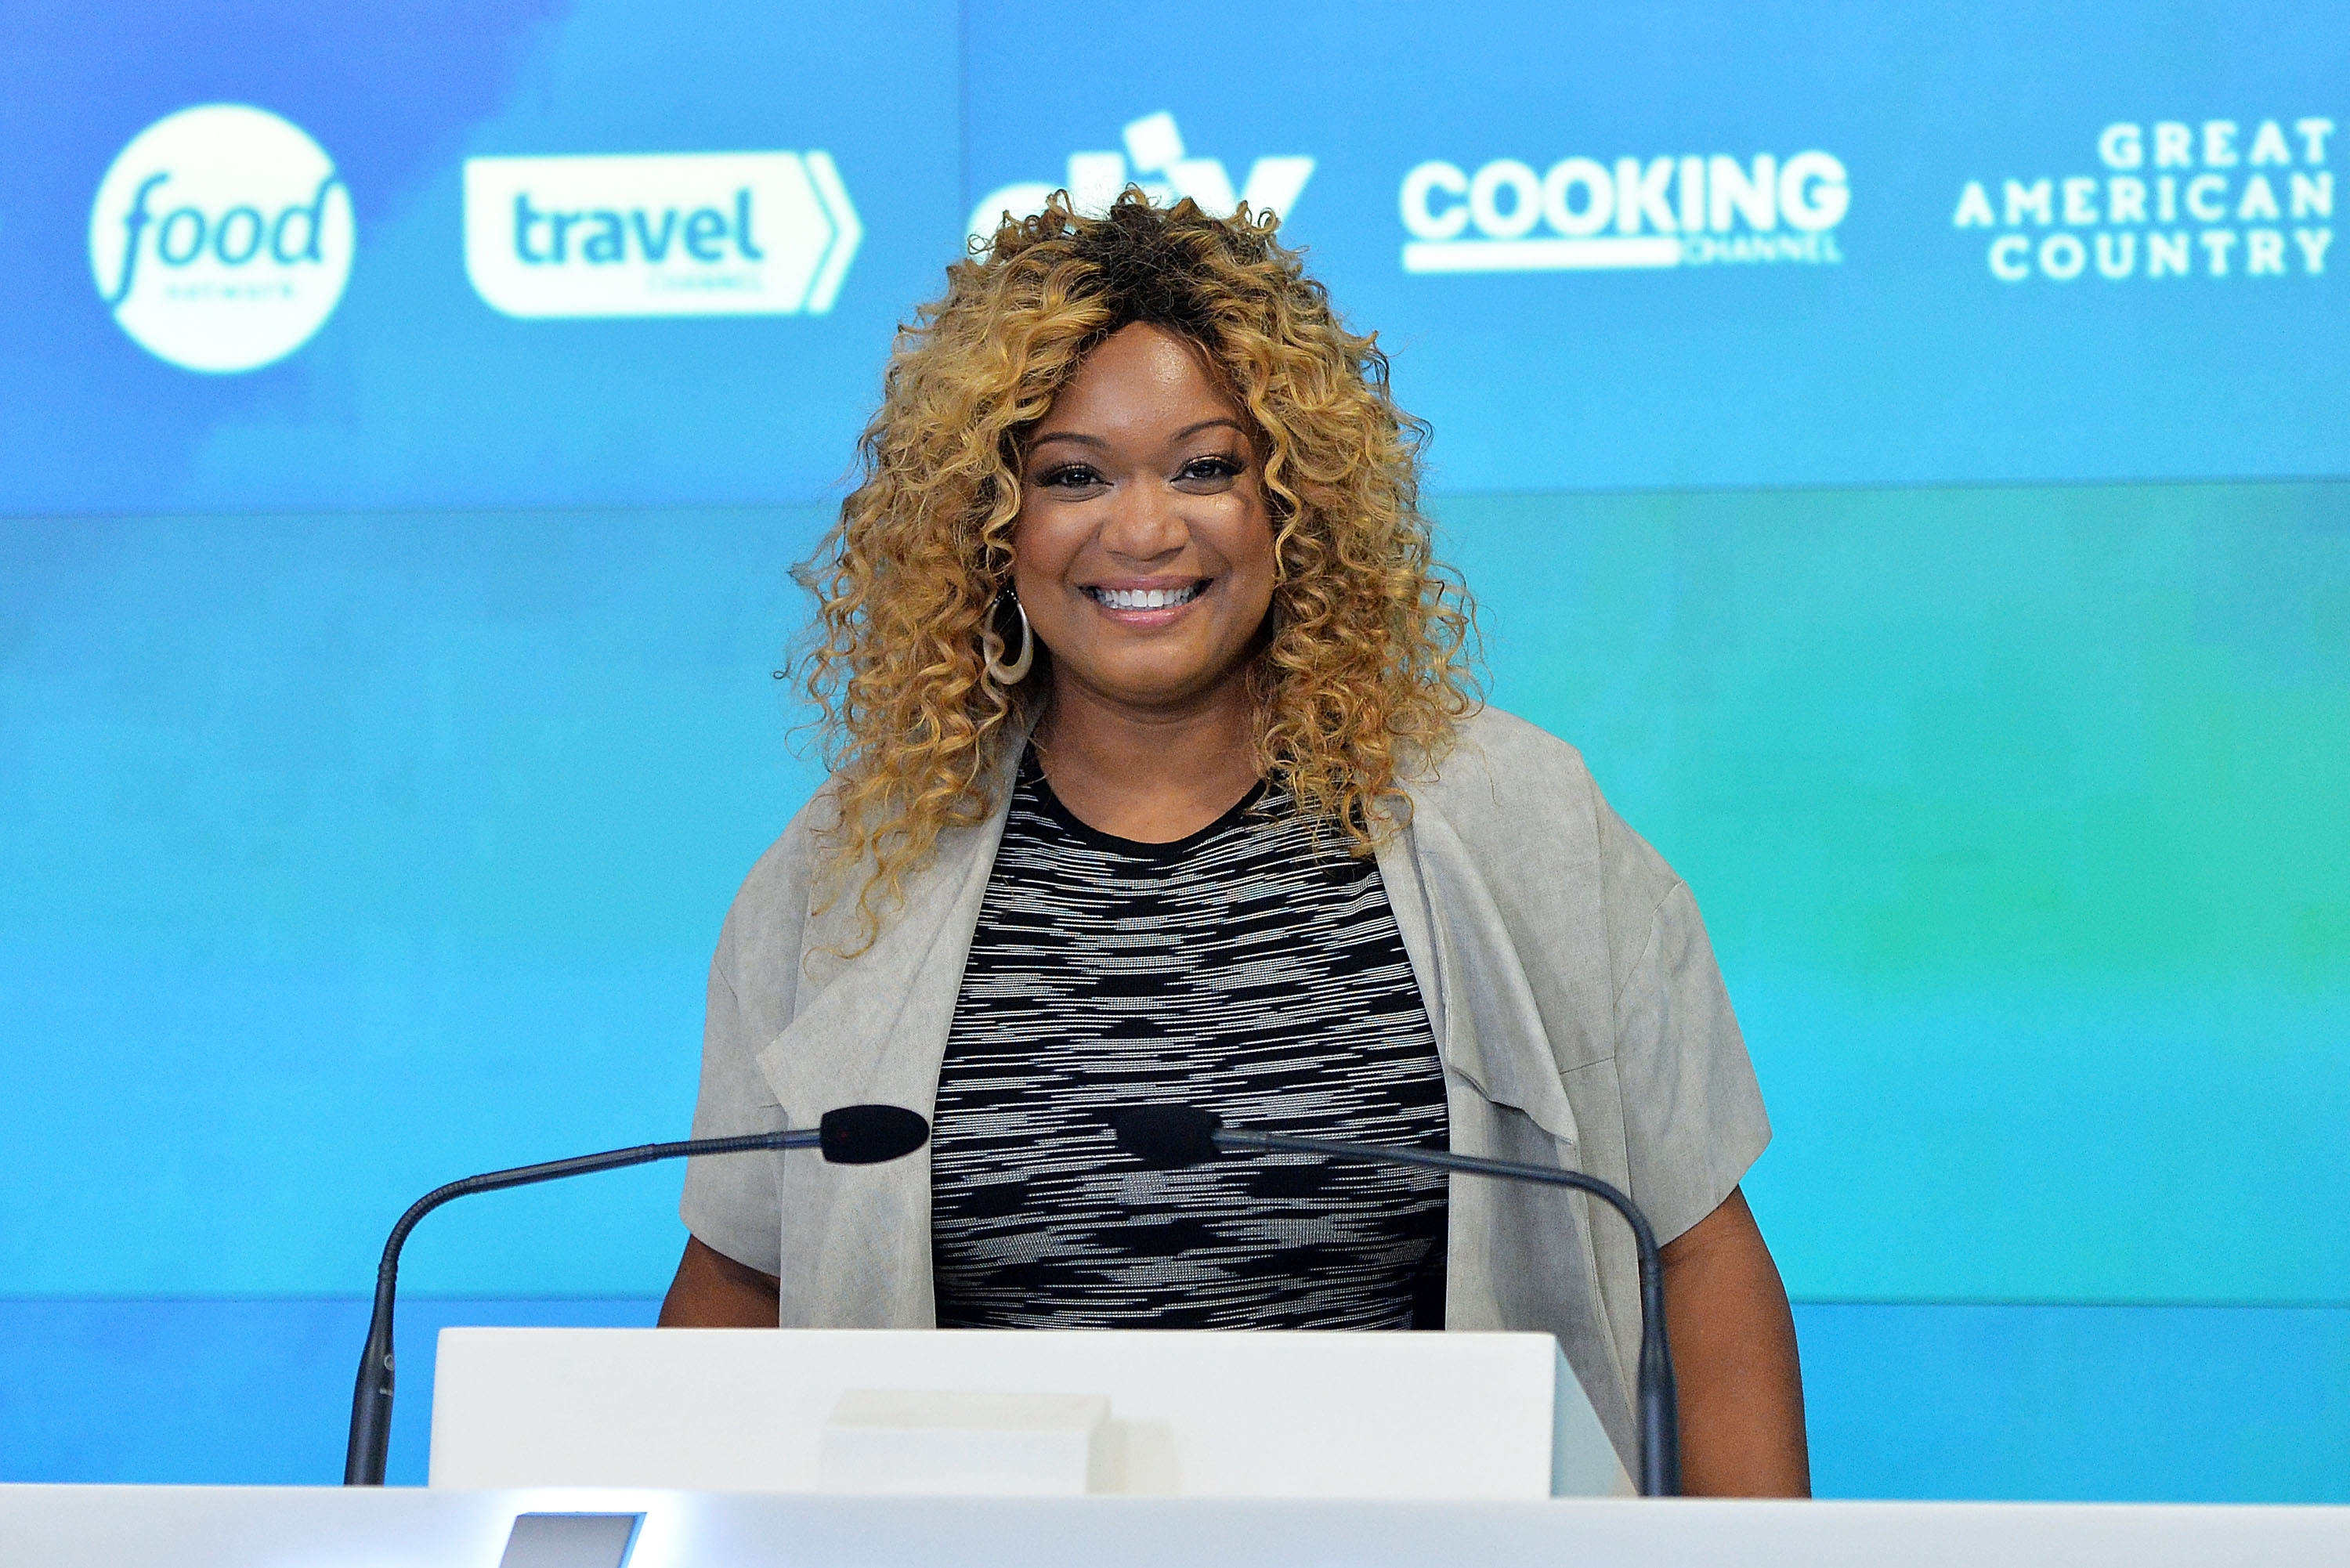 Food Network personality Sunny Anderson wears a short-sleeved gray sweater in this photograph.